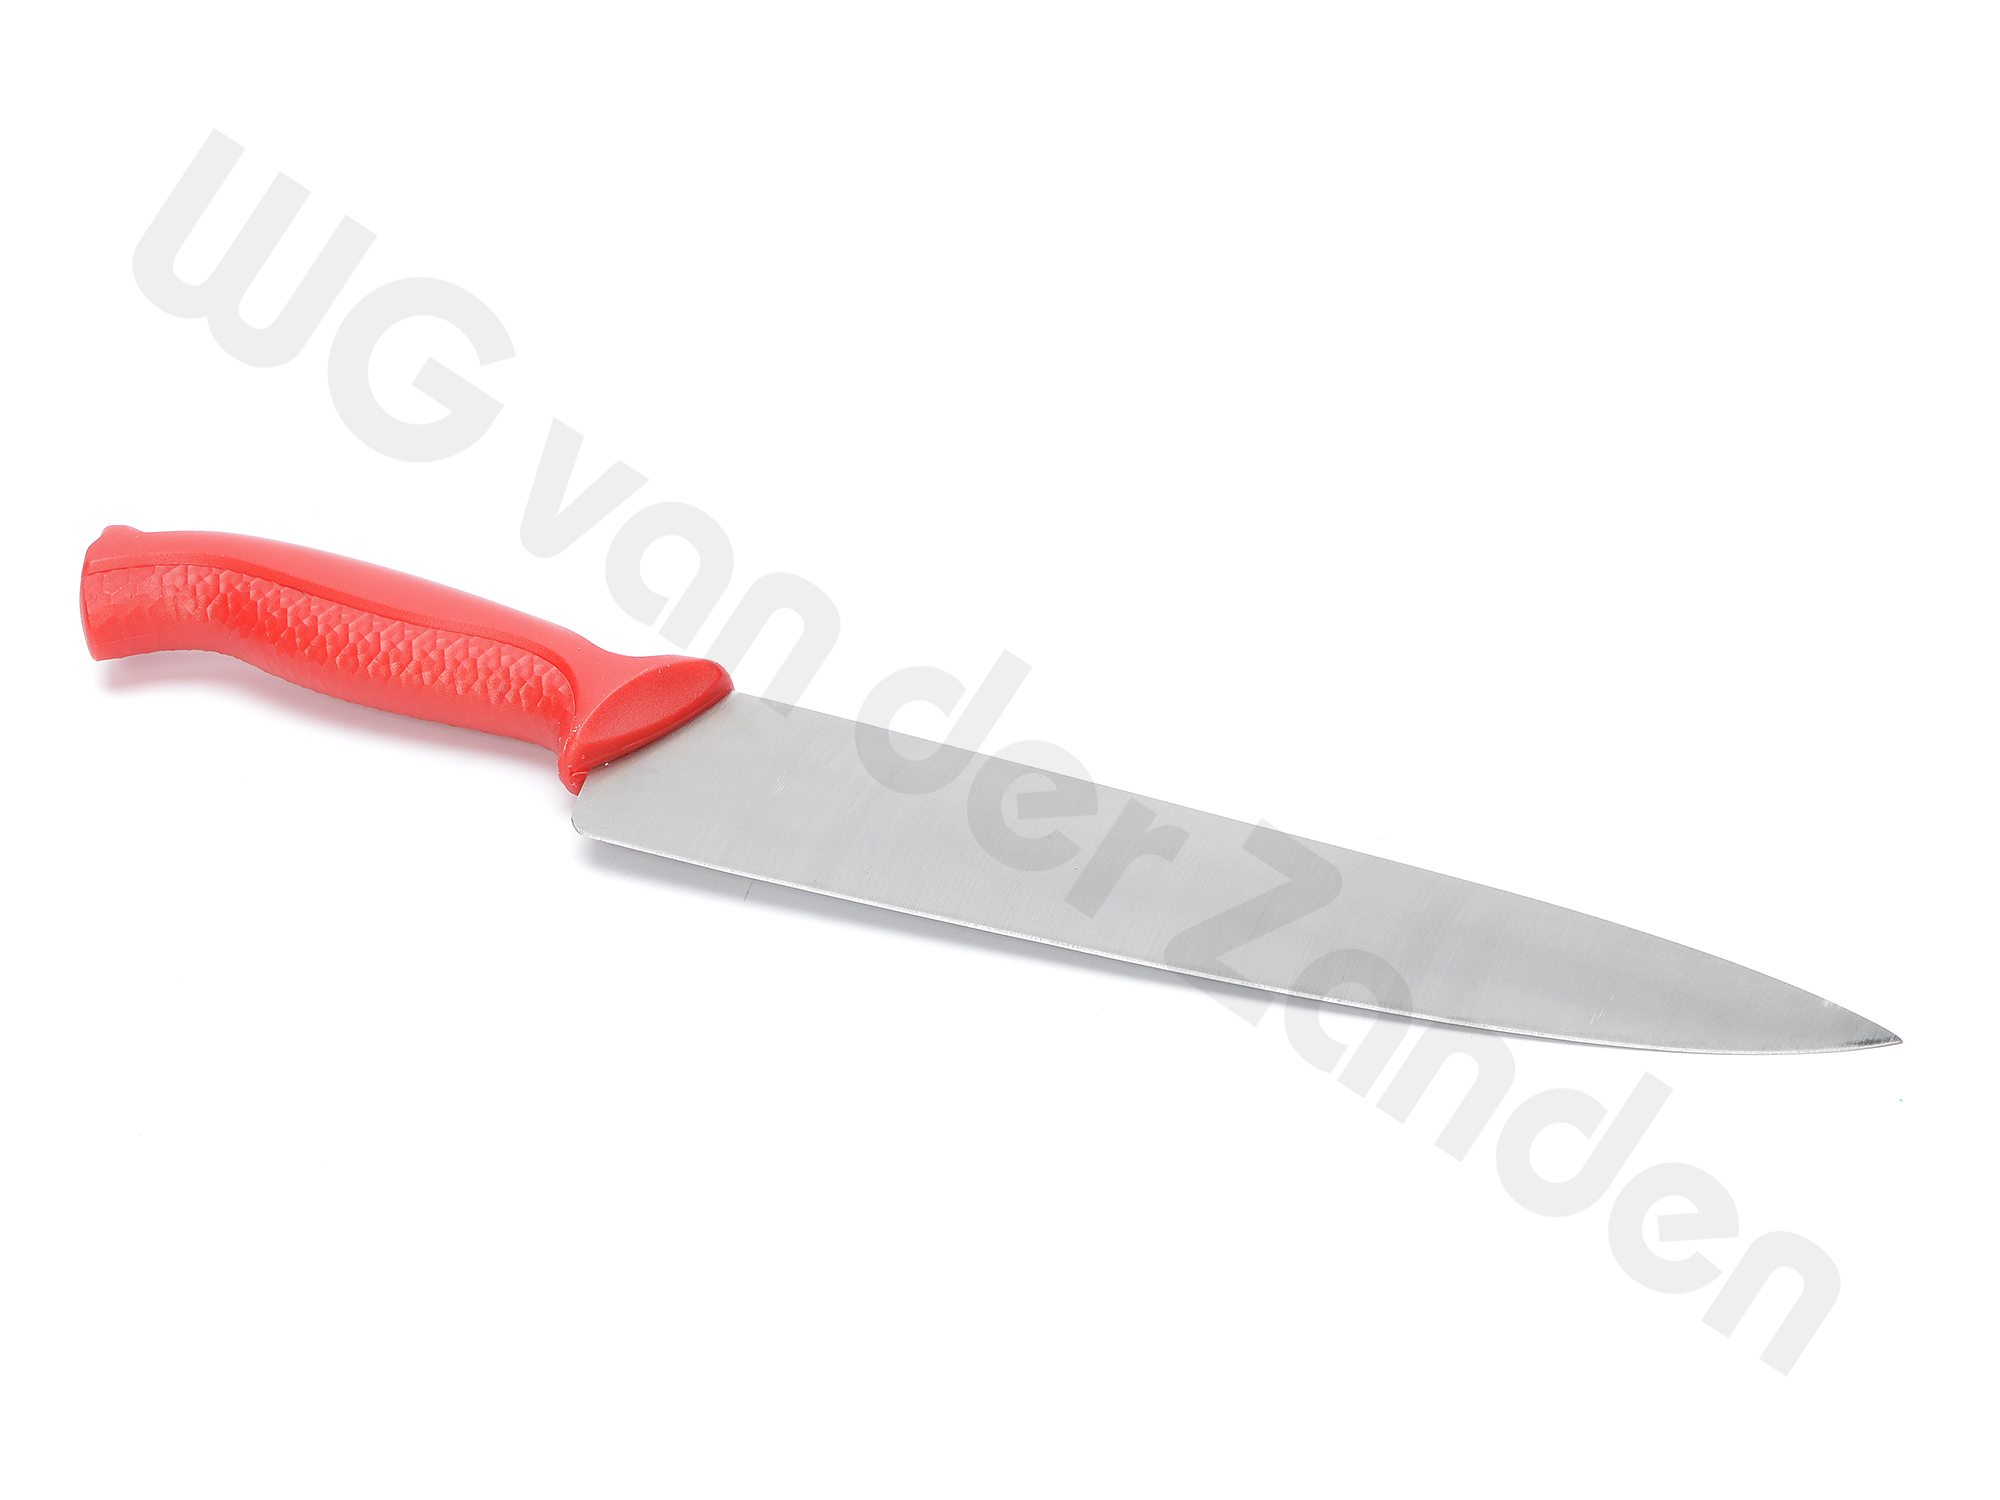 551542 CHEFS KNIFE 18CM RED HANDLE